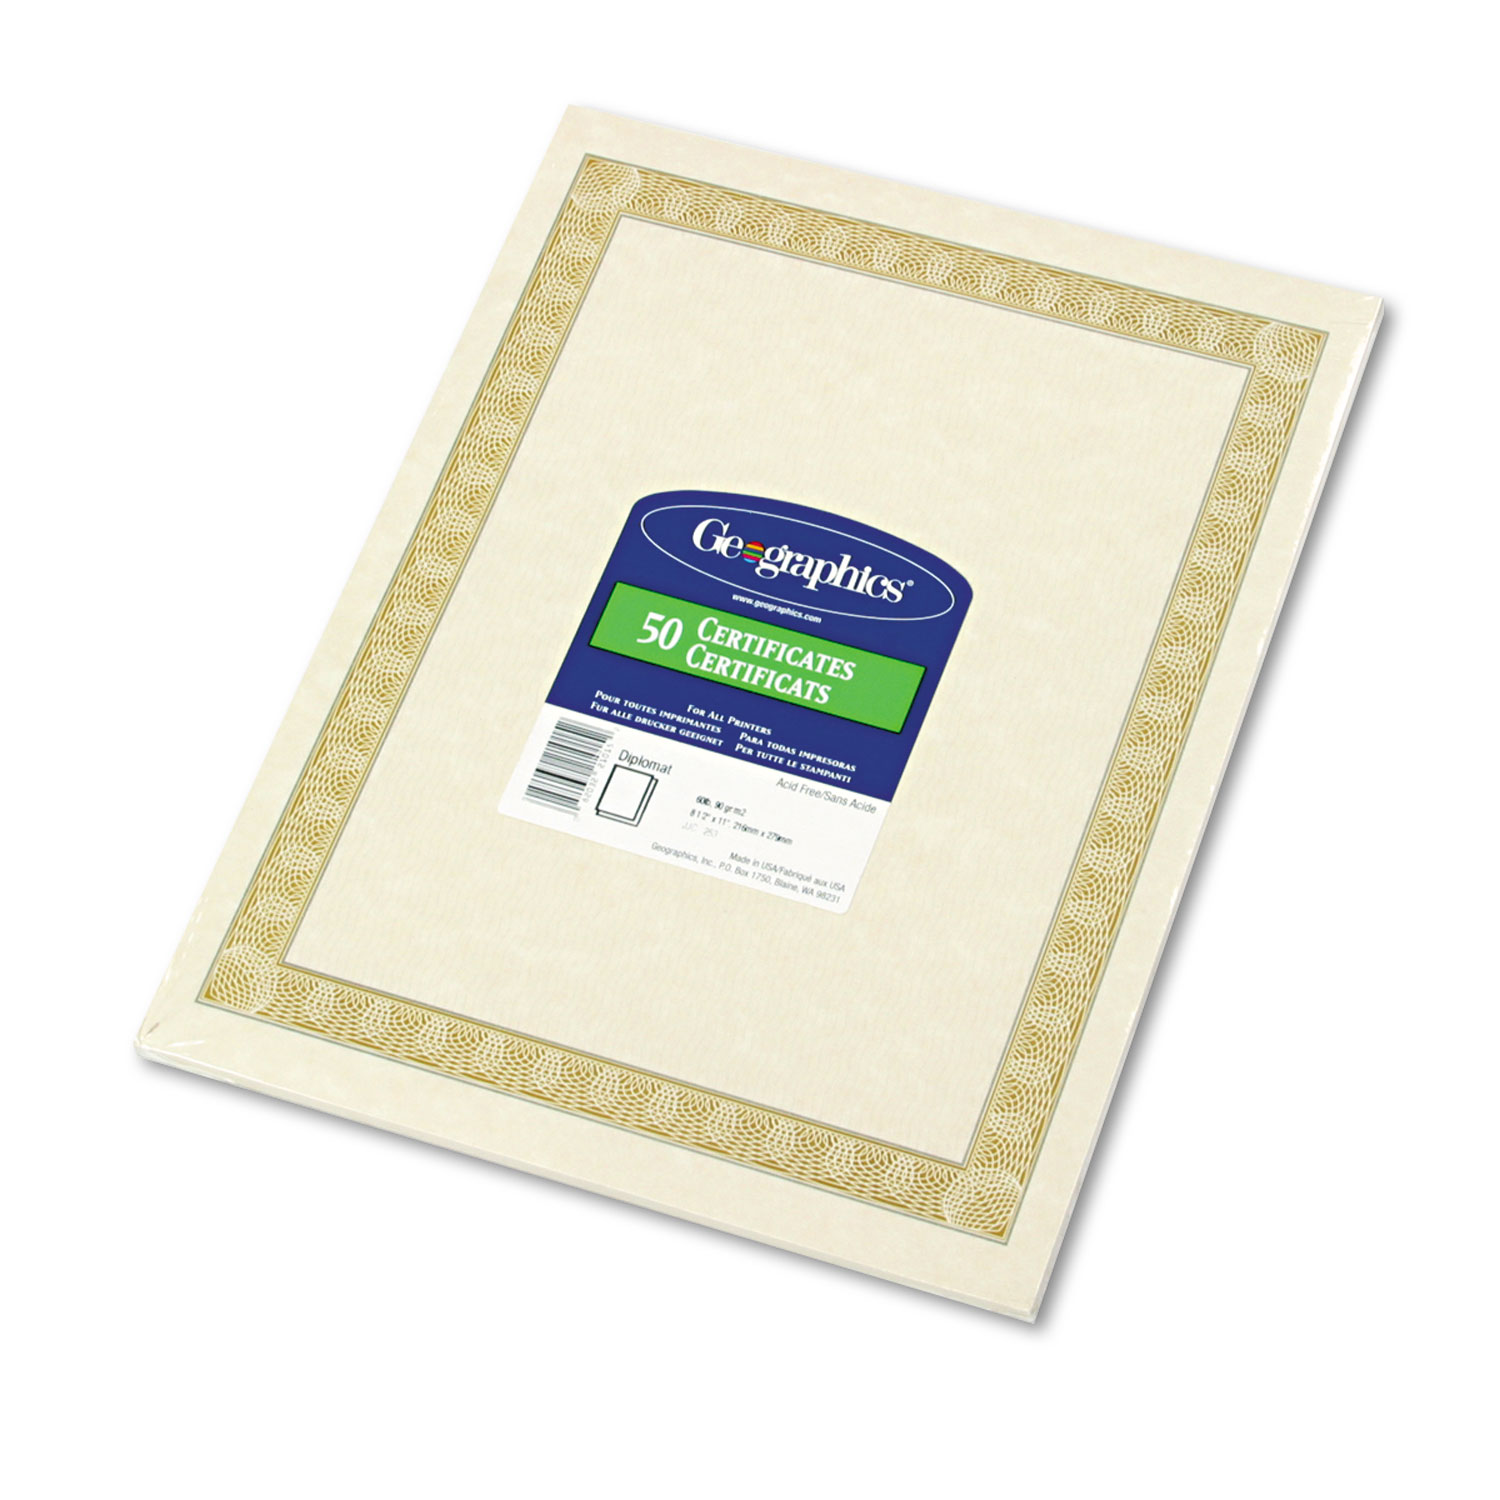 Jam Paper 8.5 X 11 Recycled Parchment Paper 24 Lbs. 100